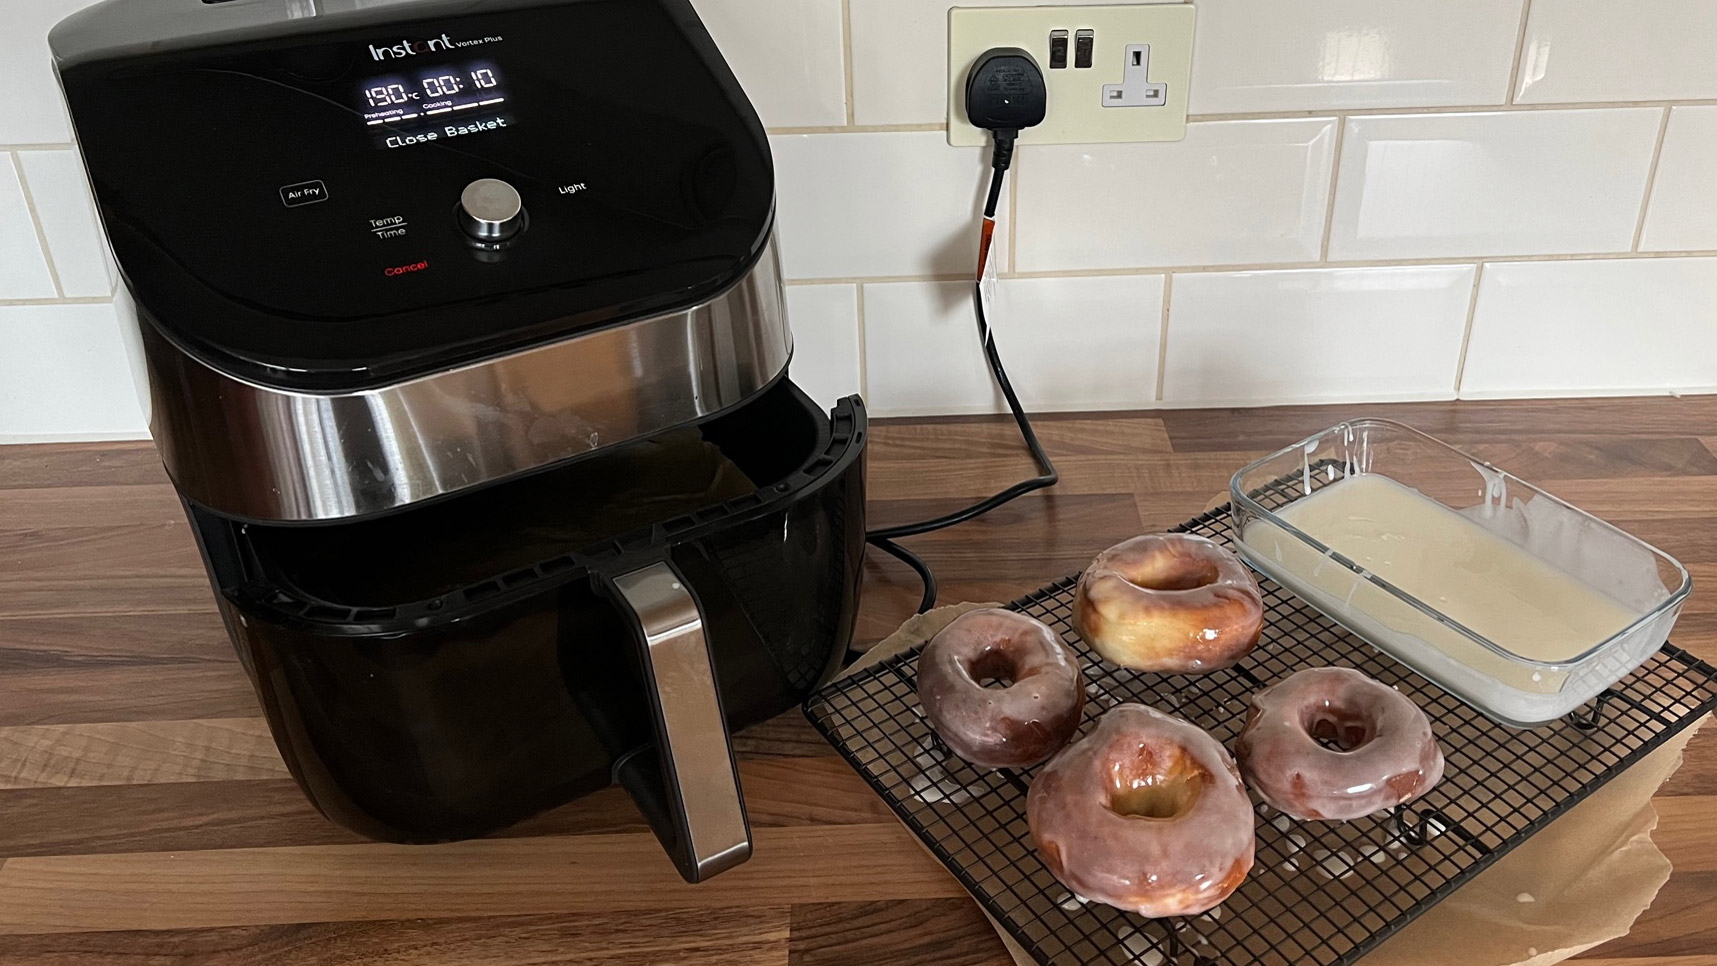 The first attempt to cook donuts in an air fryer, which were then glazed